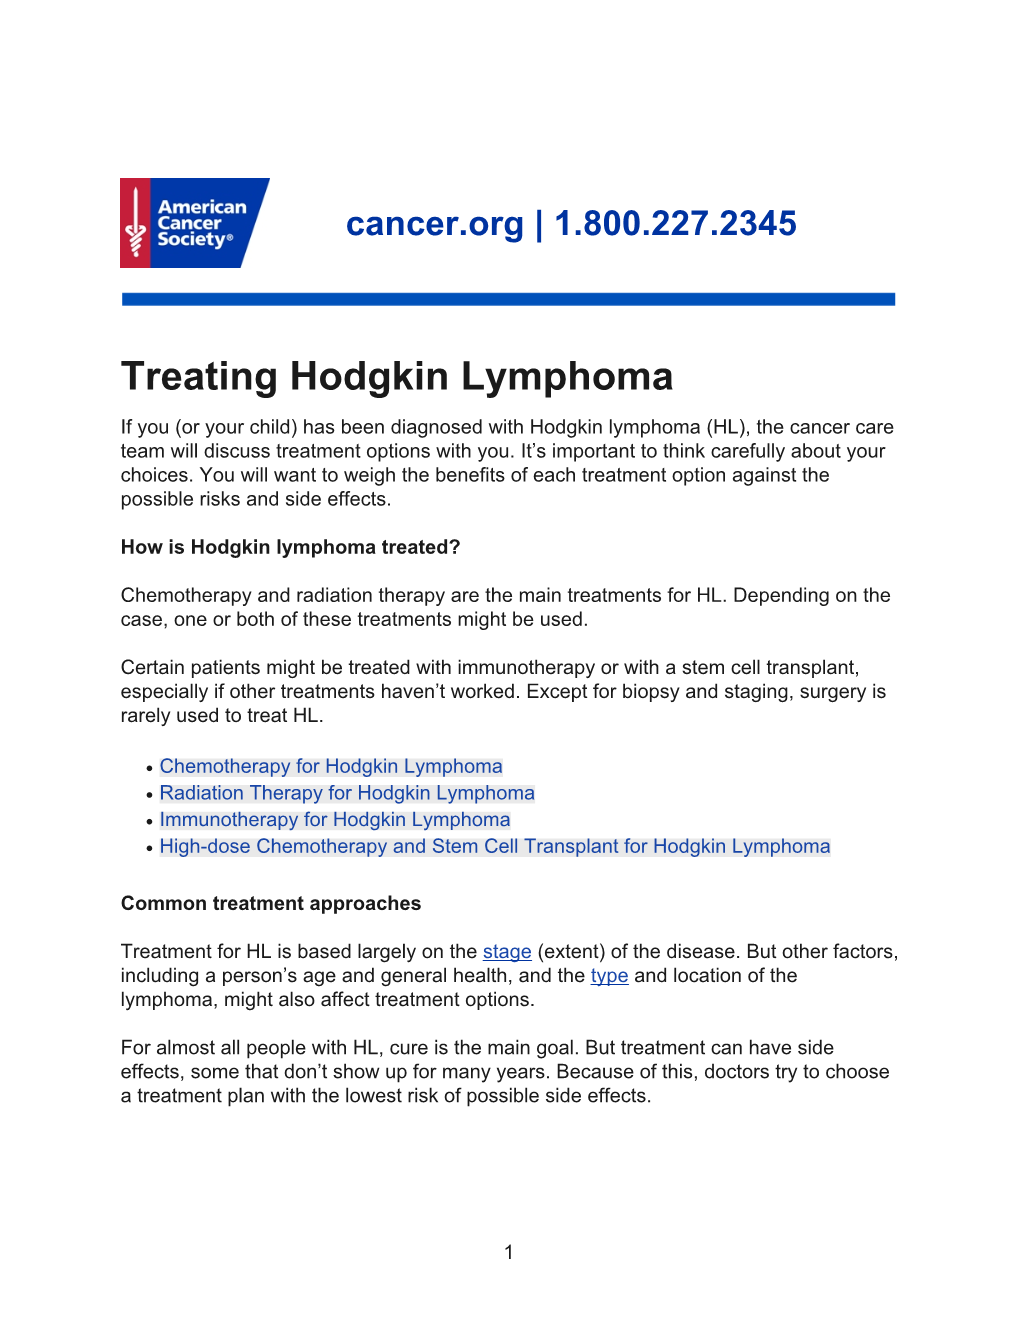 Treating Hodgkin Lymphoma If You (Or Your Child) Has Been Diagnosed with Hodgkin Lymphoma (HL), the Cancer Care Team Will Discuss Treatment Options with You